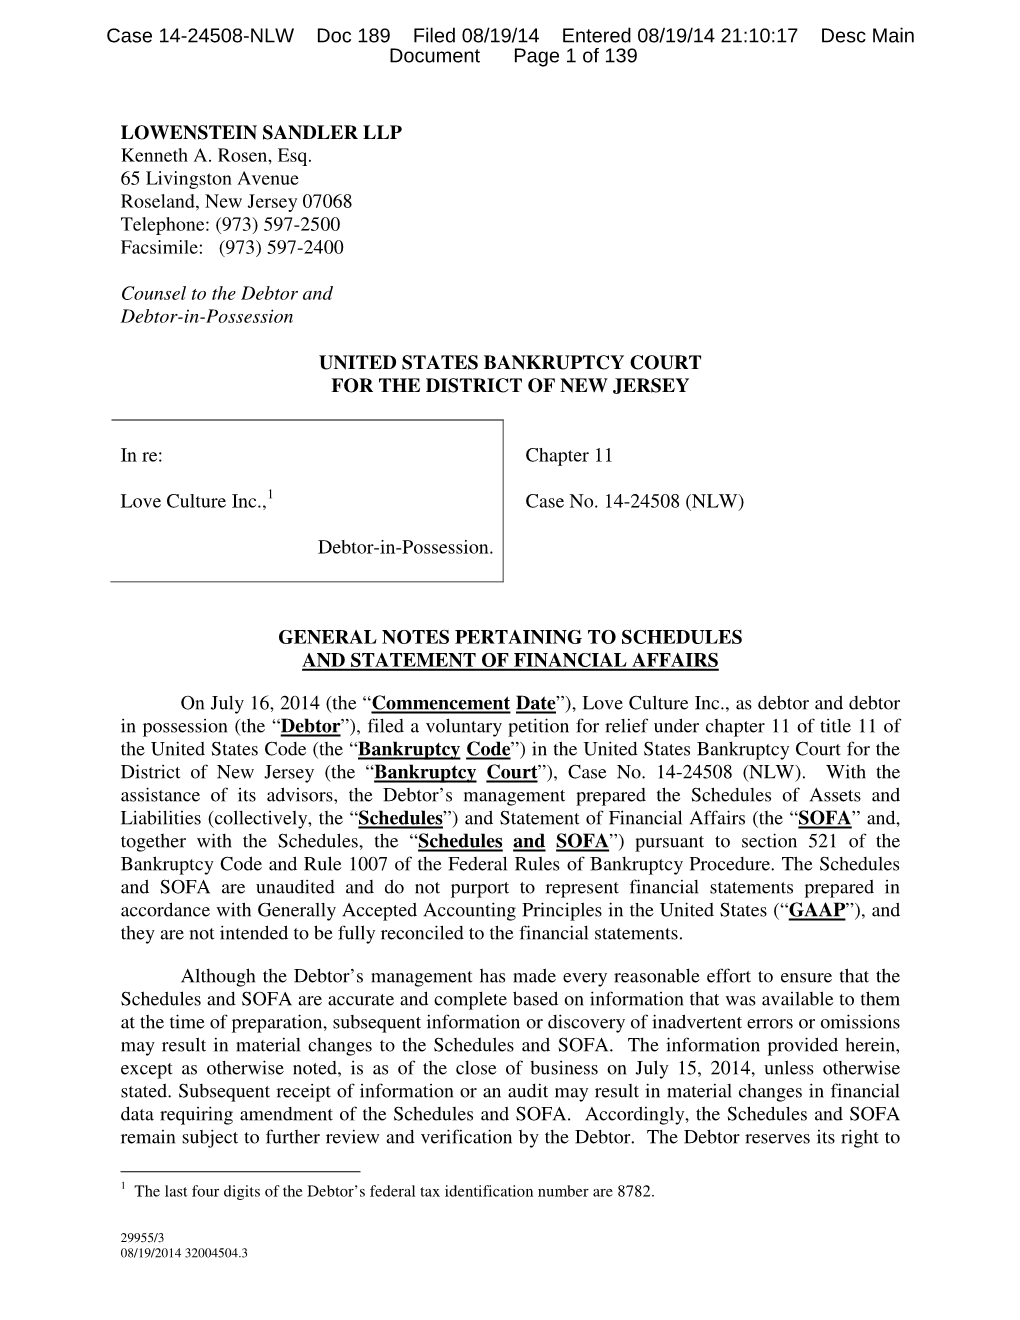 Case 14-24508-NLW Doc 189 Filed 08/19/14 Entered 08/19/14 21:10:17 Desc Main Document Page 1 of 139